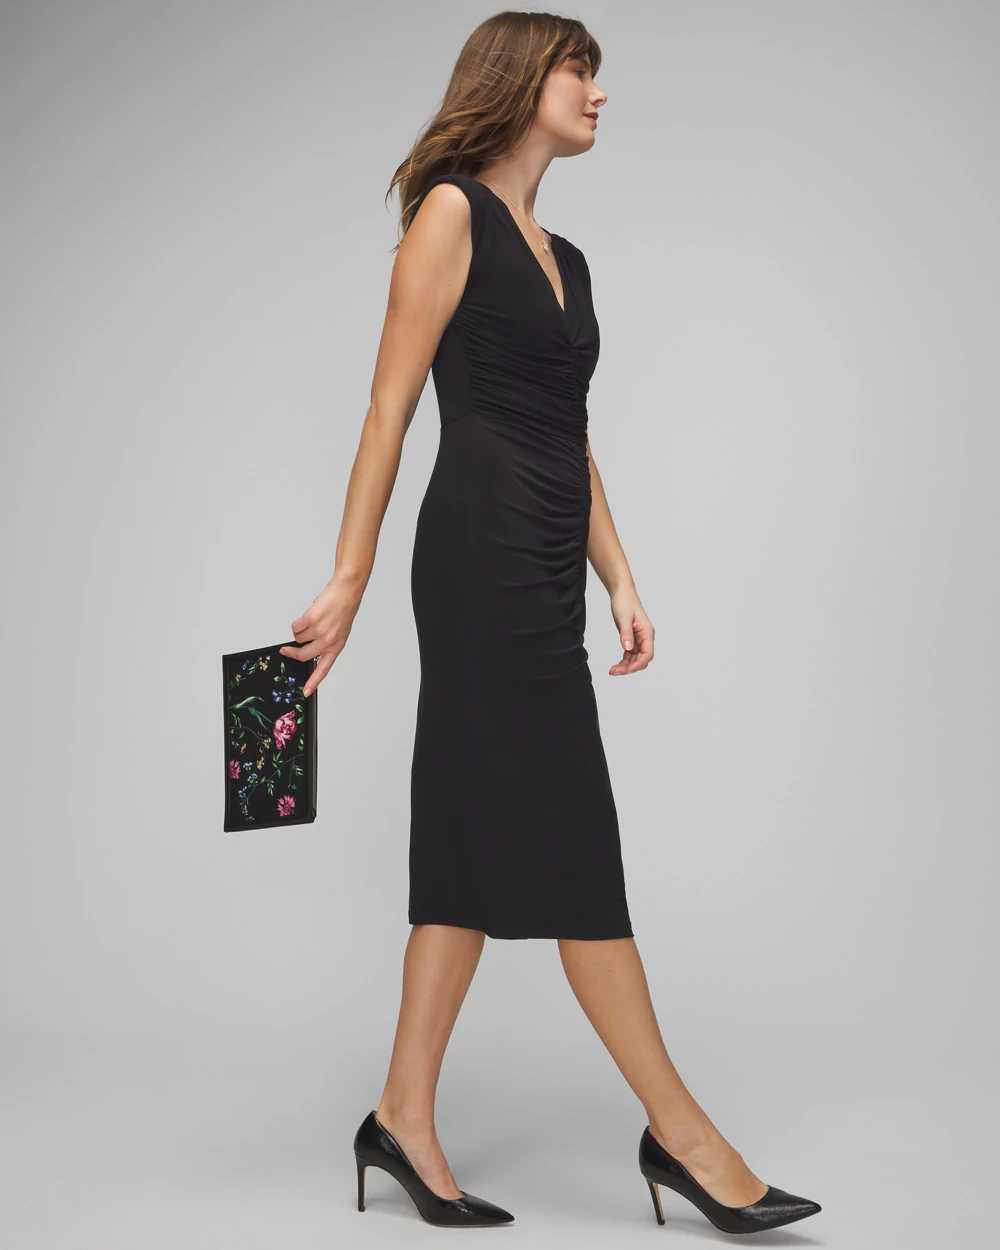 Sleeveless Ruched Bodycon Midi Dress click to view larger image.